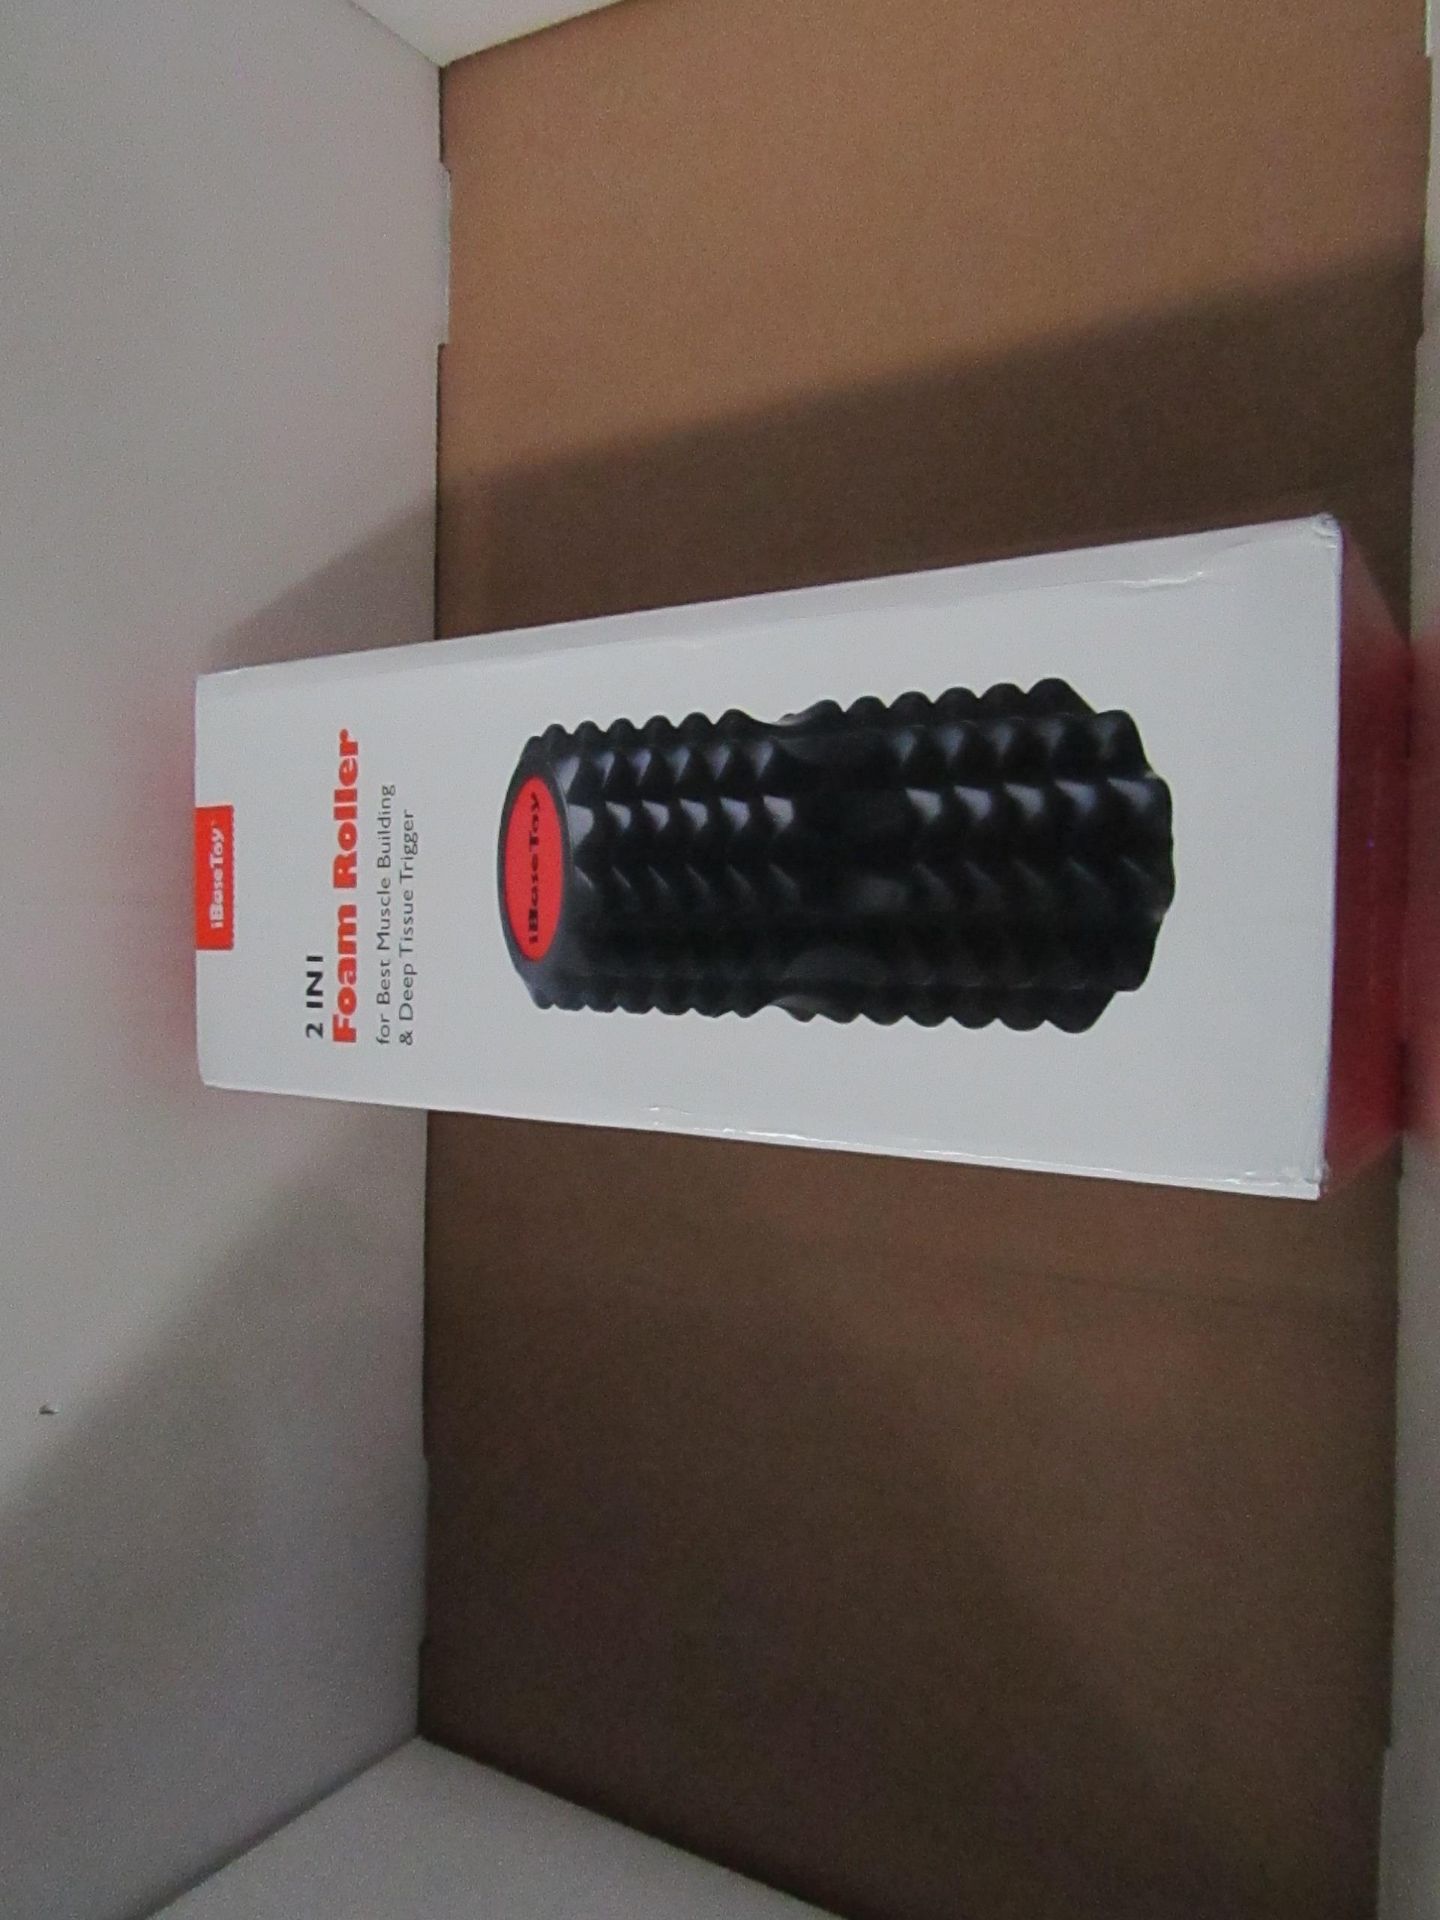 IBASETOY 2 IN 1 Roller for Best Muscle Massage and Deep Tissue Trigger - New & Boxed.